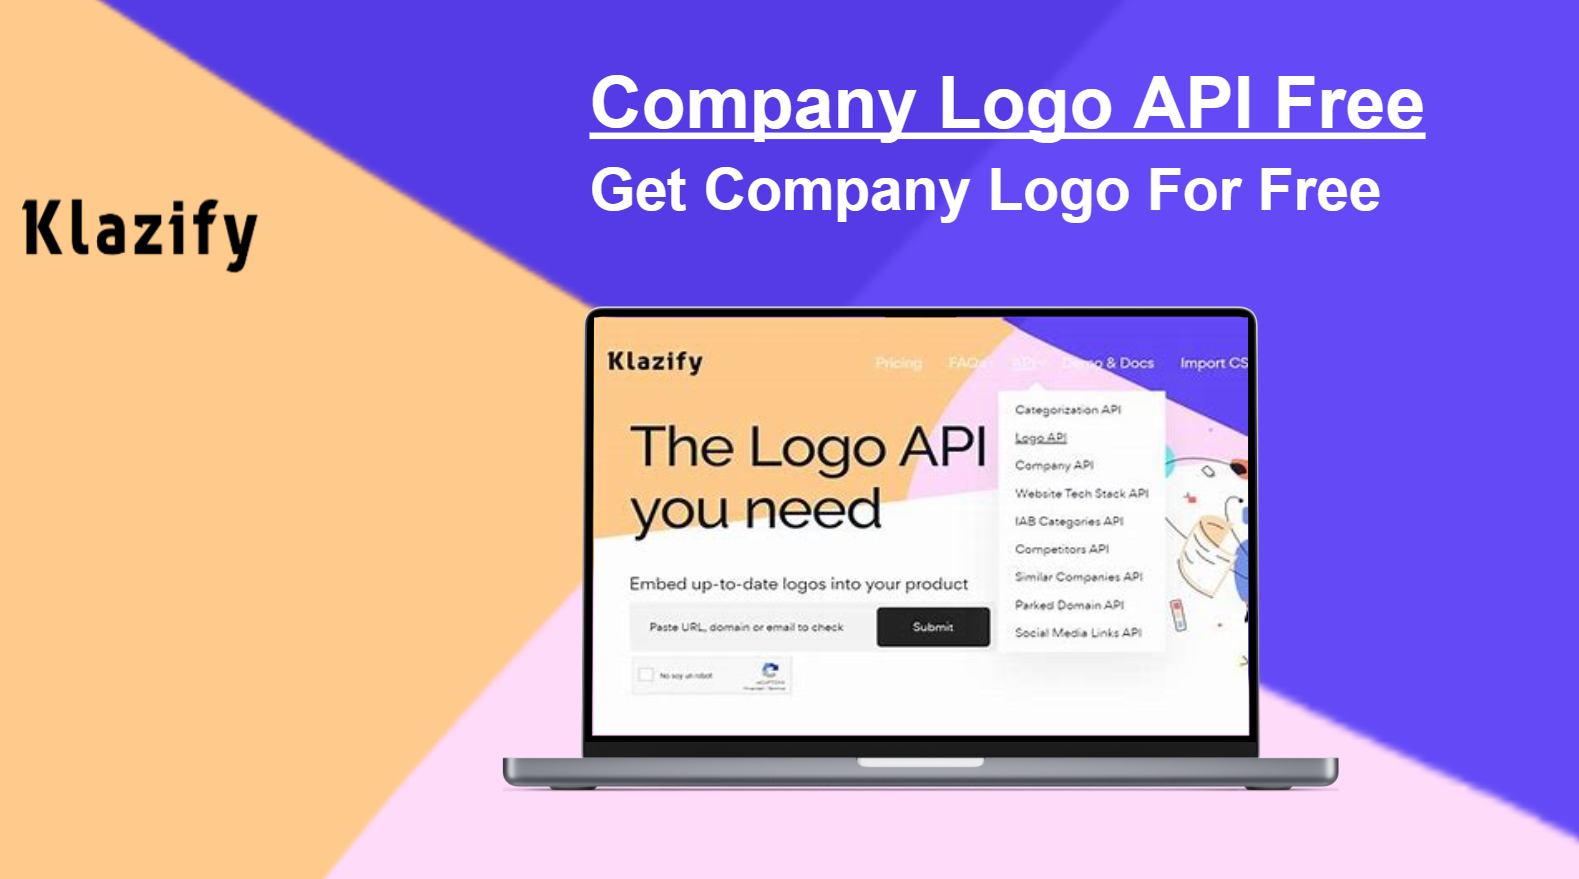 Get Company Logo For Free With This API